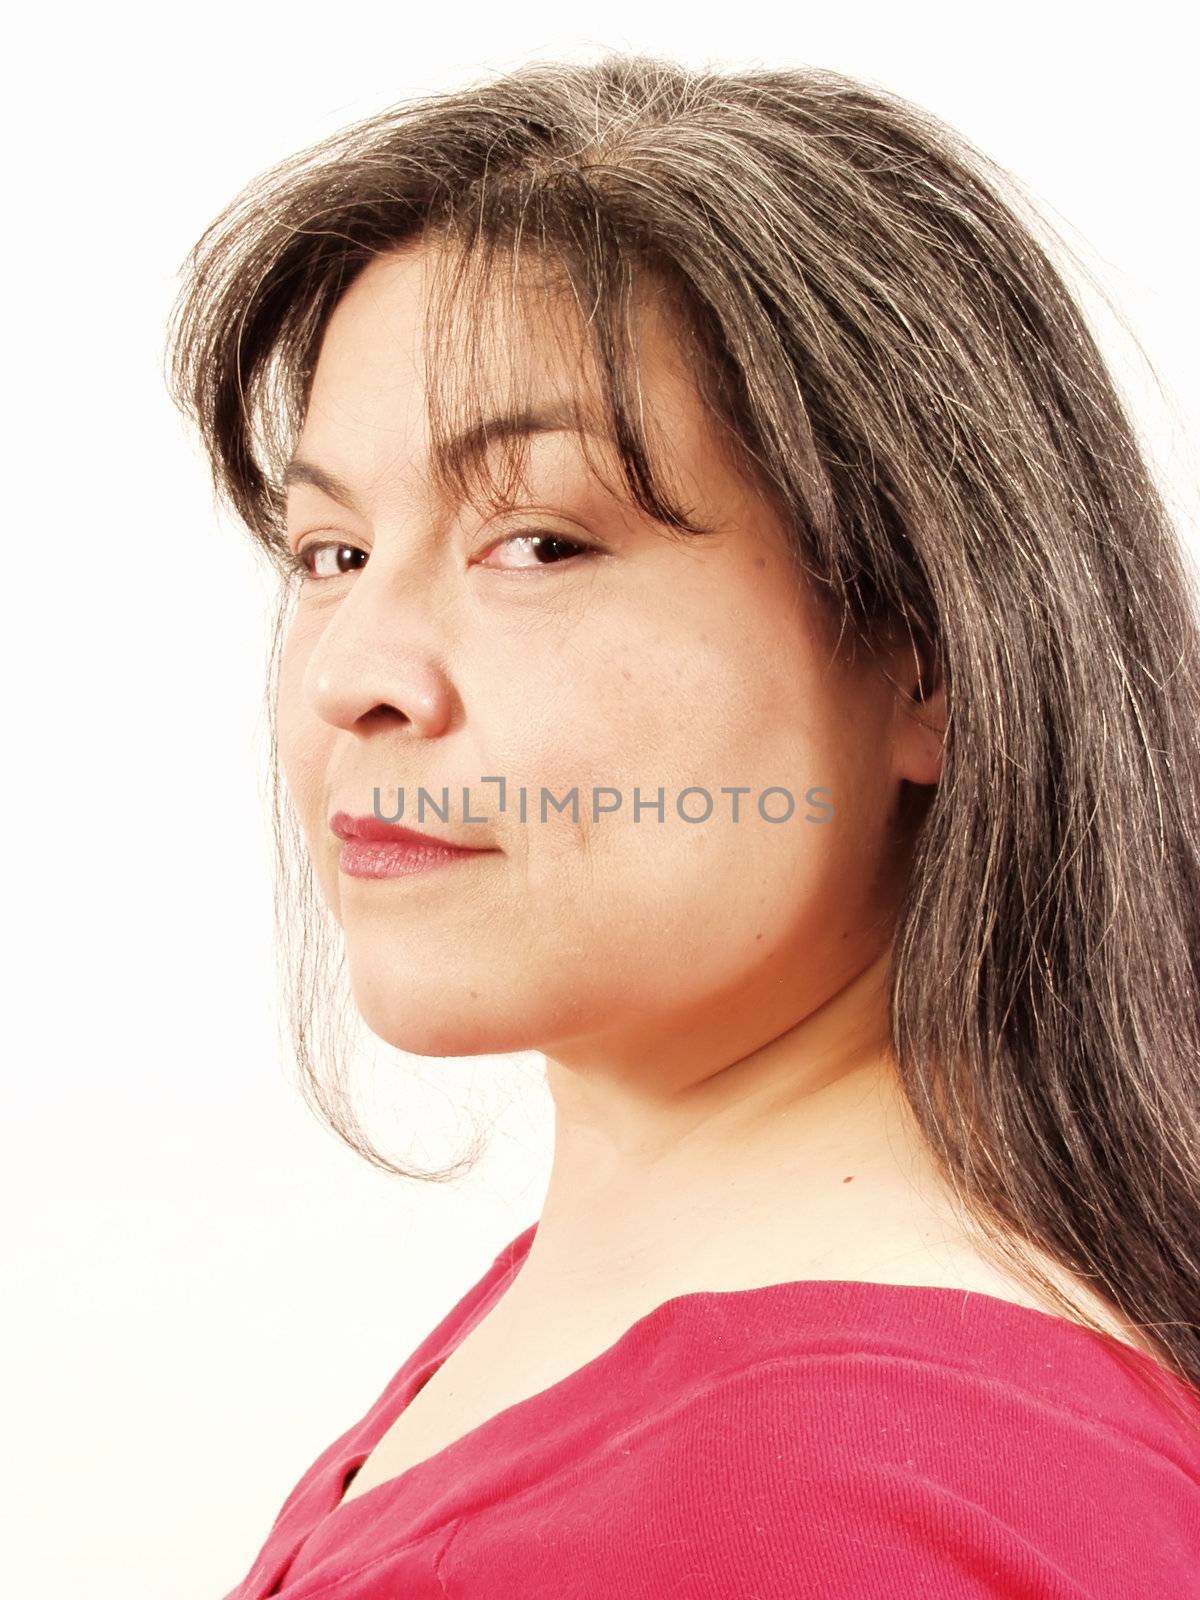 A woman with greying hair takes a sly look at the camera. On an isolated white background.